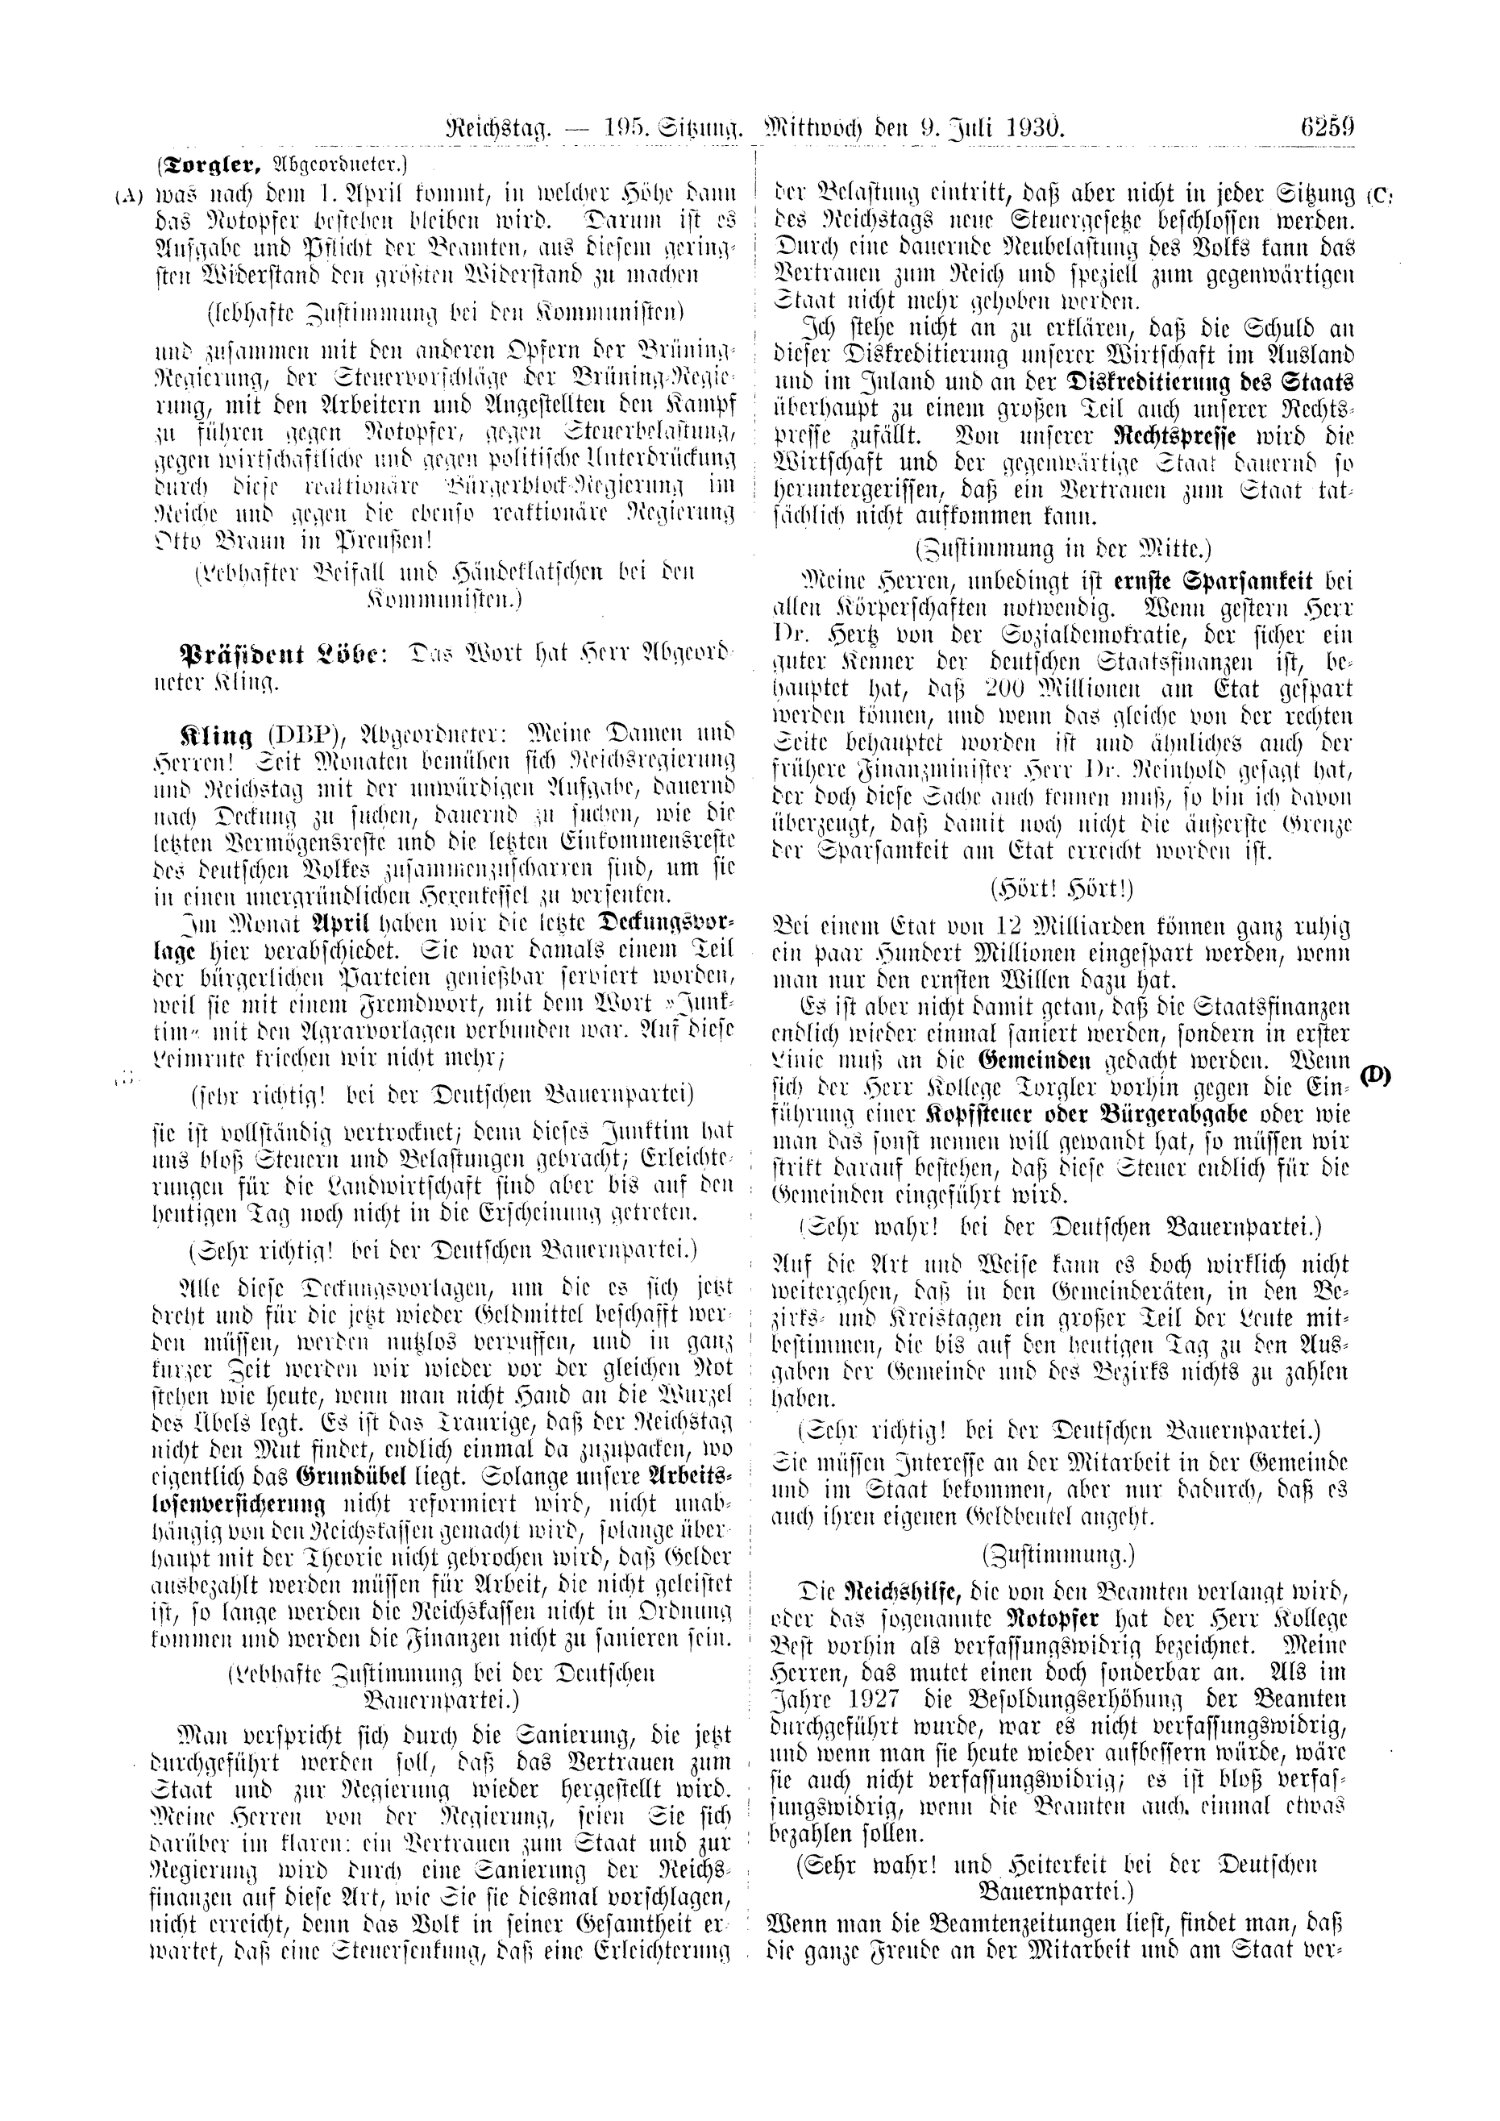 Scan of page 6259